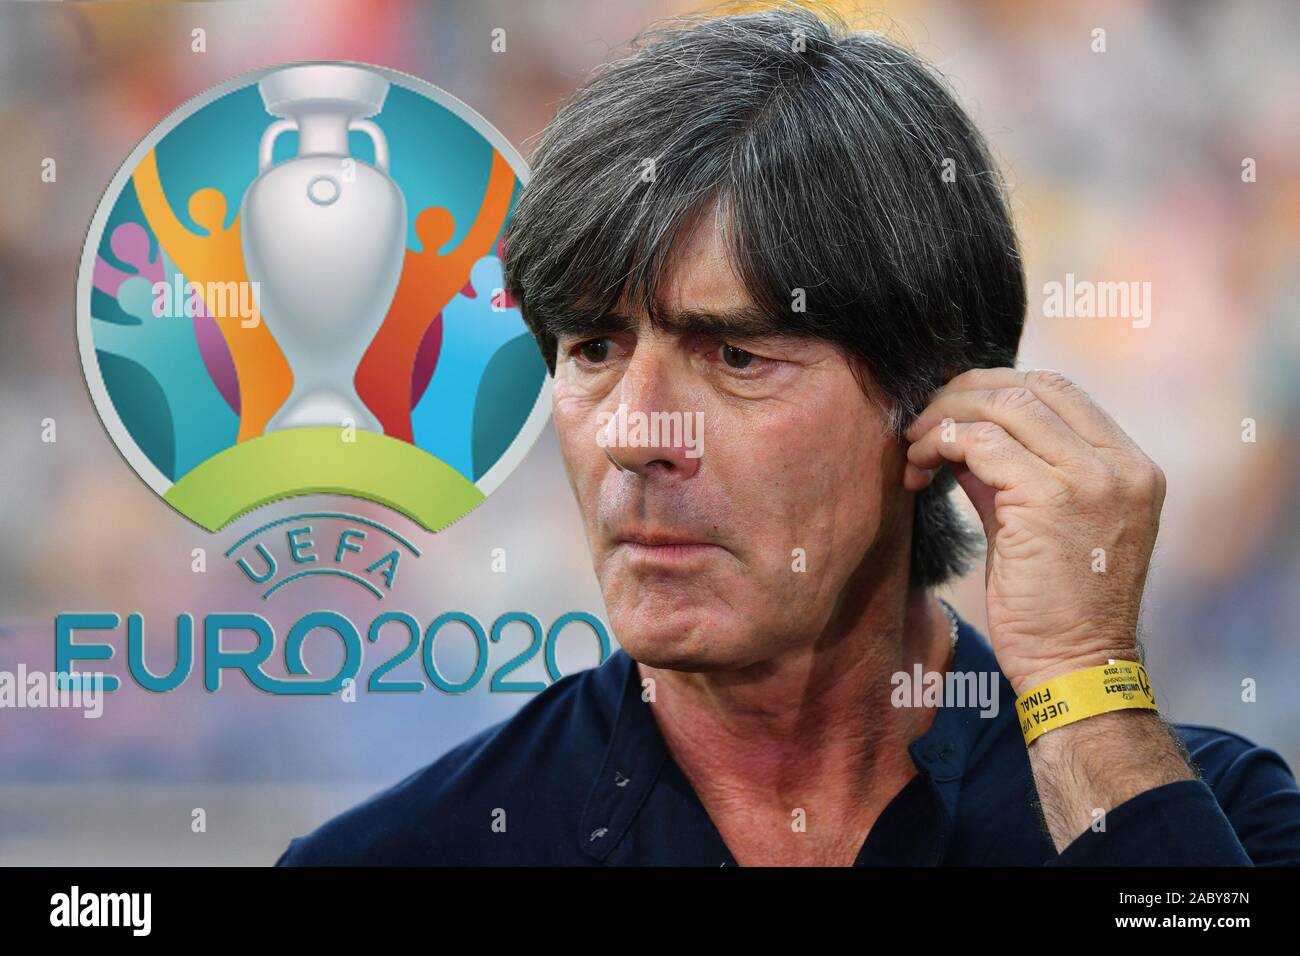 Udine, Italien. 07th Sep, 2019. PHOTO ASSEMBLY: Federal coach Joachim Jogi  LOEW, L, AÖW (GER) in front of the Euro 2020 logo, EURO 2020, European  Championship, archive photo: Federal coach Joachim Jogi